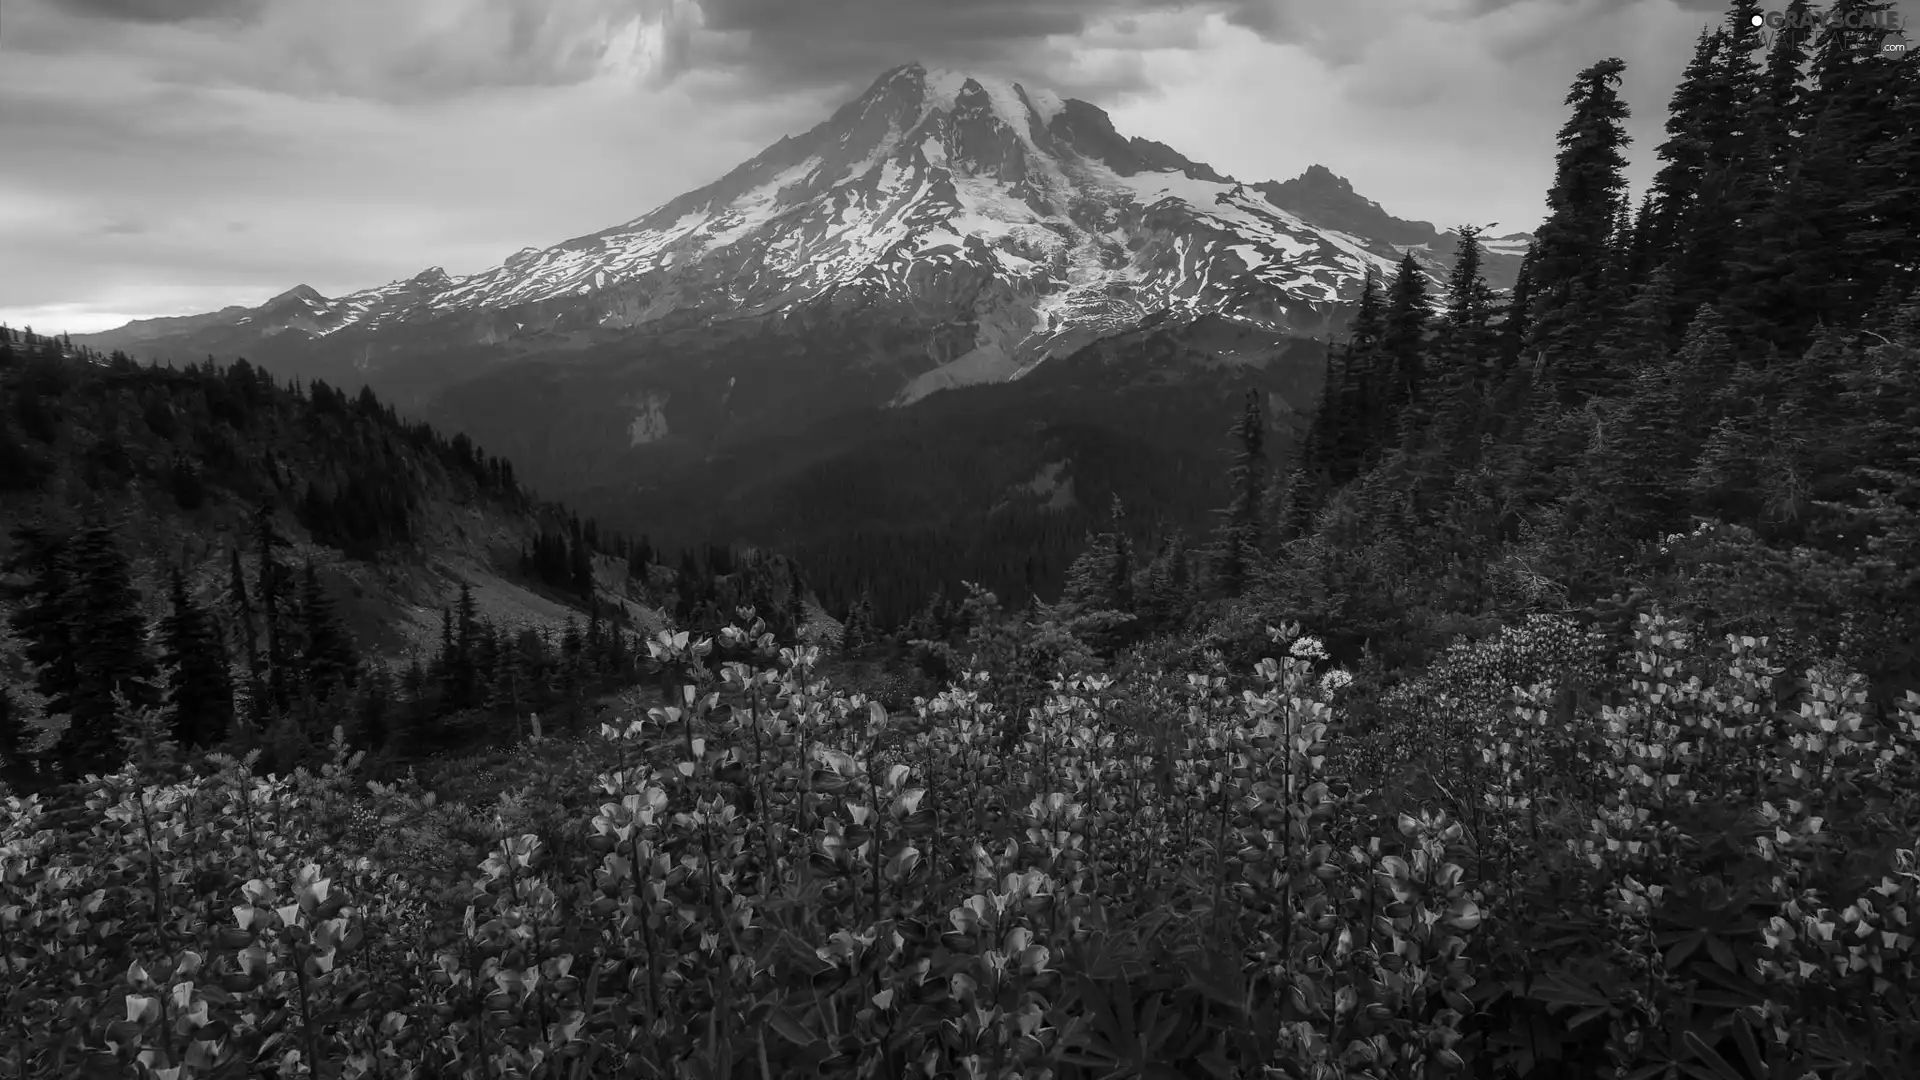 viewes, Mountains, Meadow, Washington State, lupine, Stratovolcano Mount Rainier, Mount Rainier National Park, The United States, Great Sunsets, trees